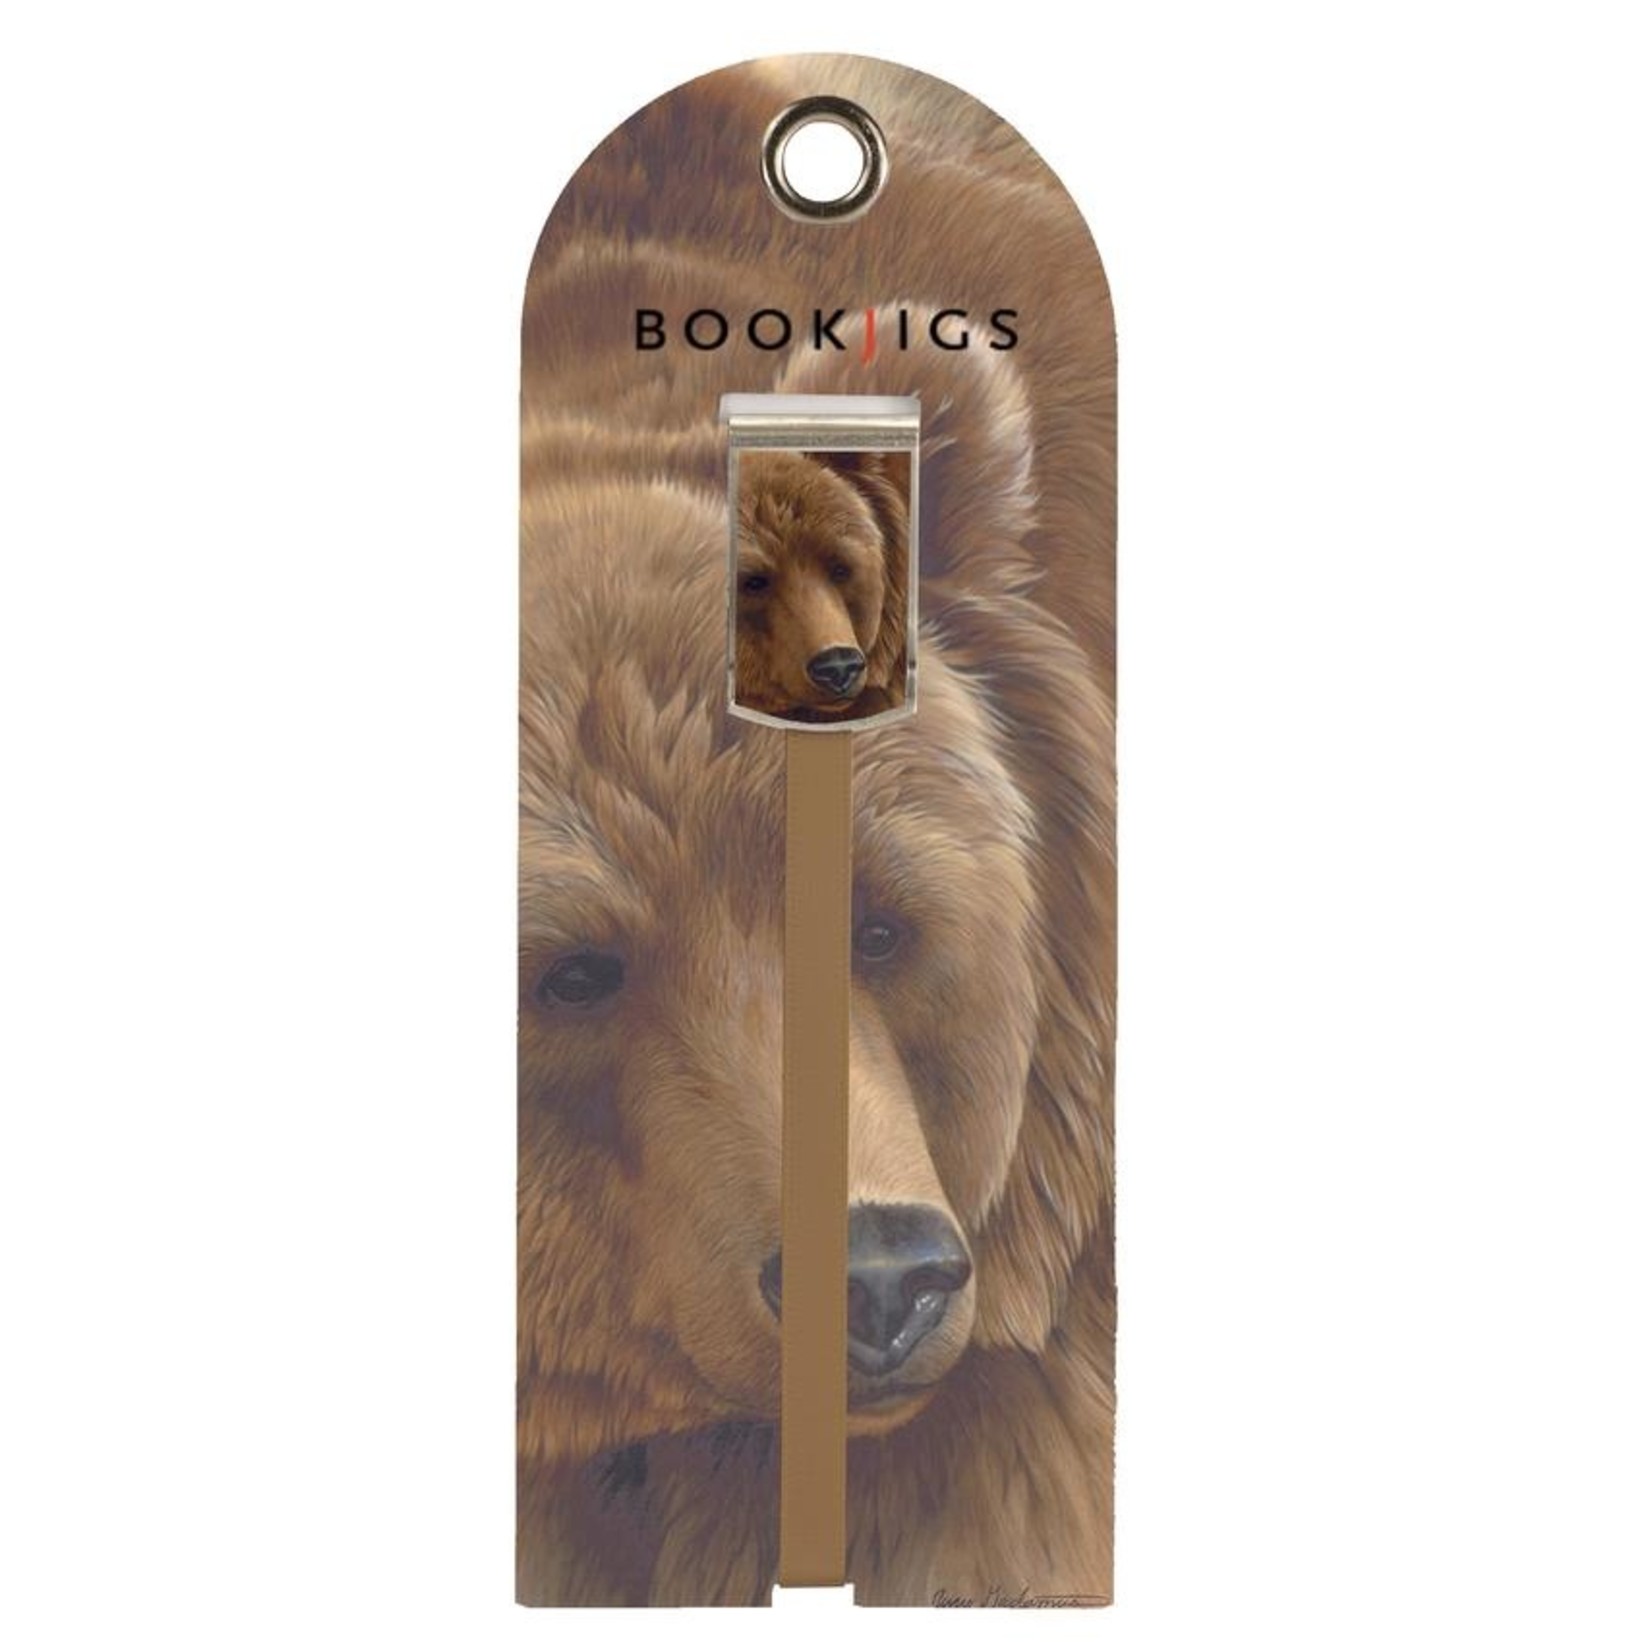 Bookjigs Bookmark - Grizzly